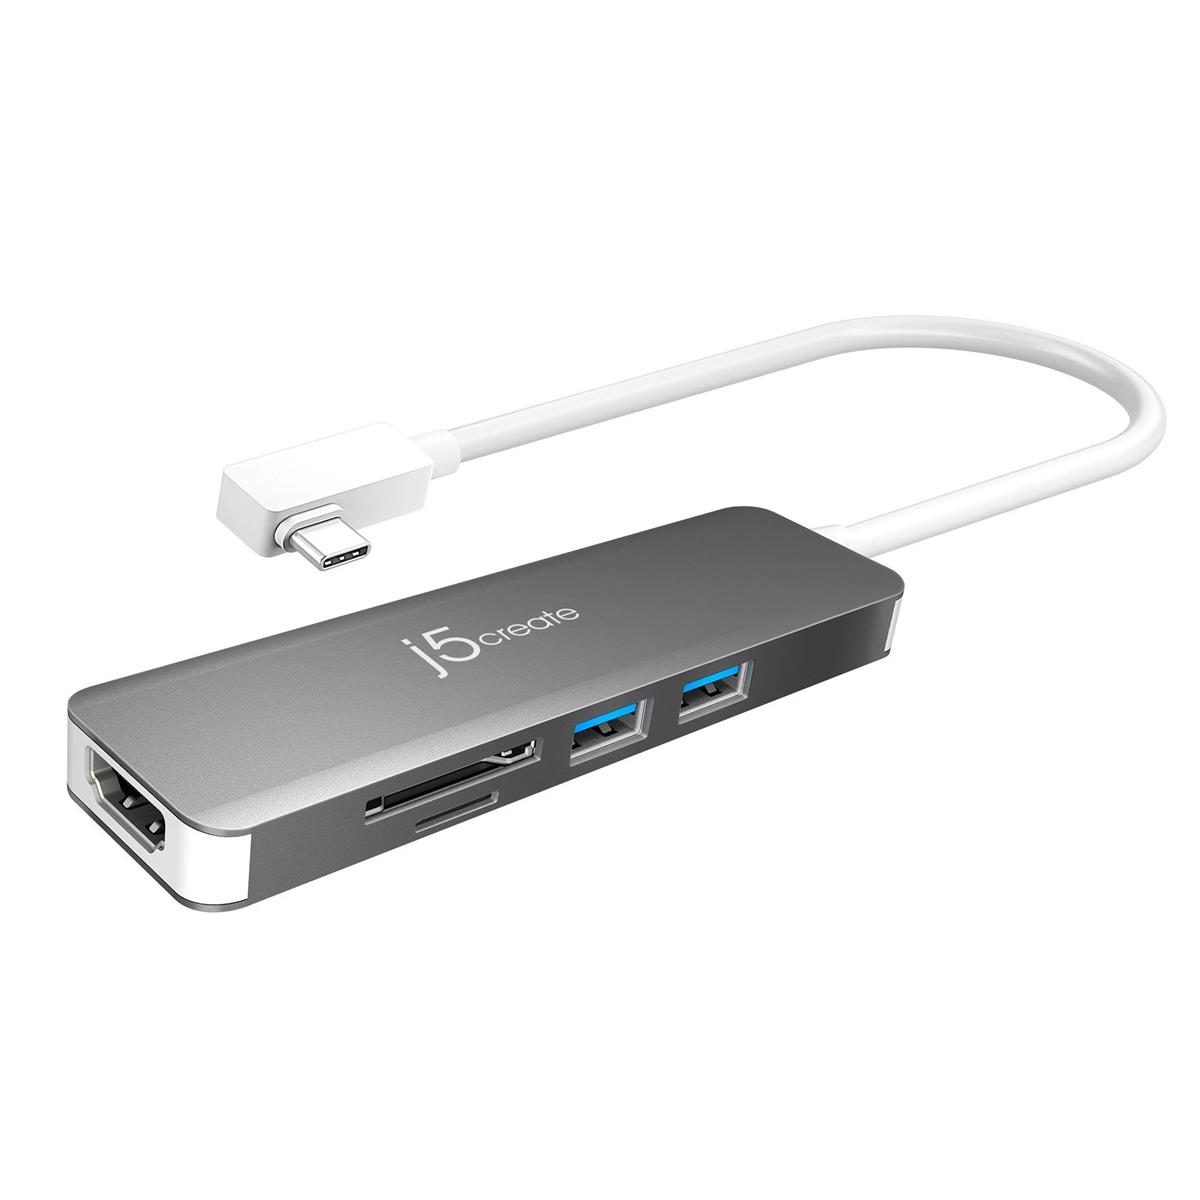 Image of J5 Create JCD372 5-in-1 USB-C 3.1 SuperSpeed + Multi-Adapter